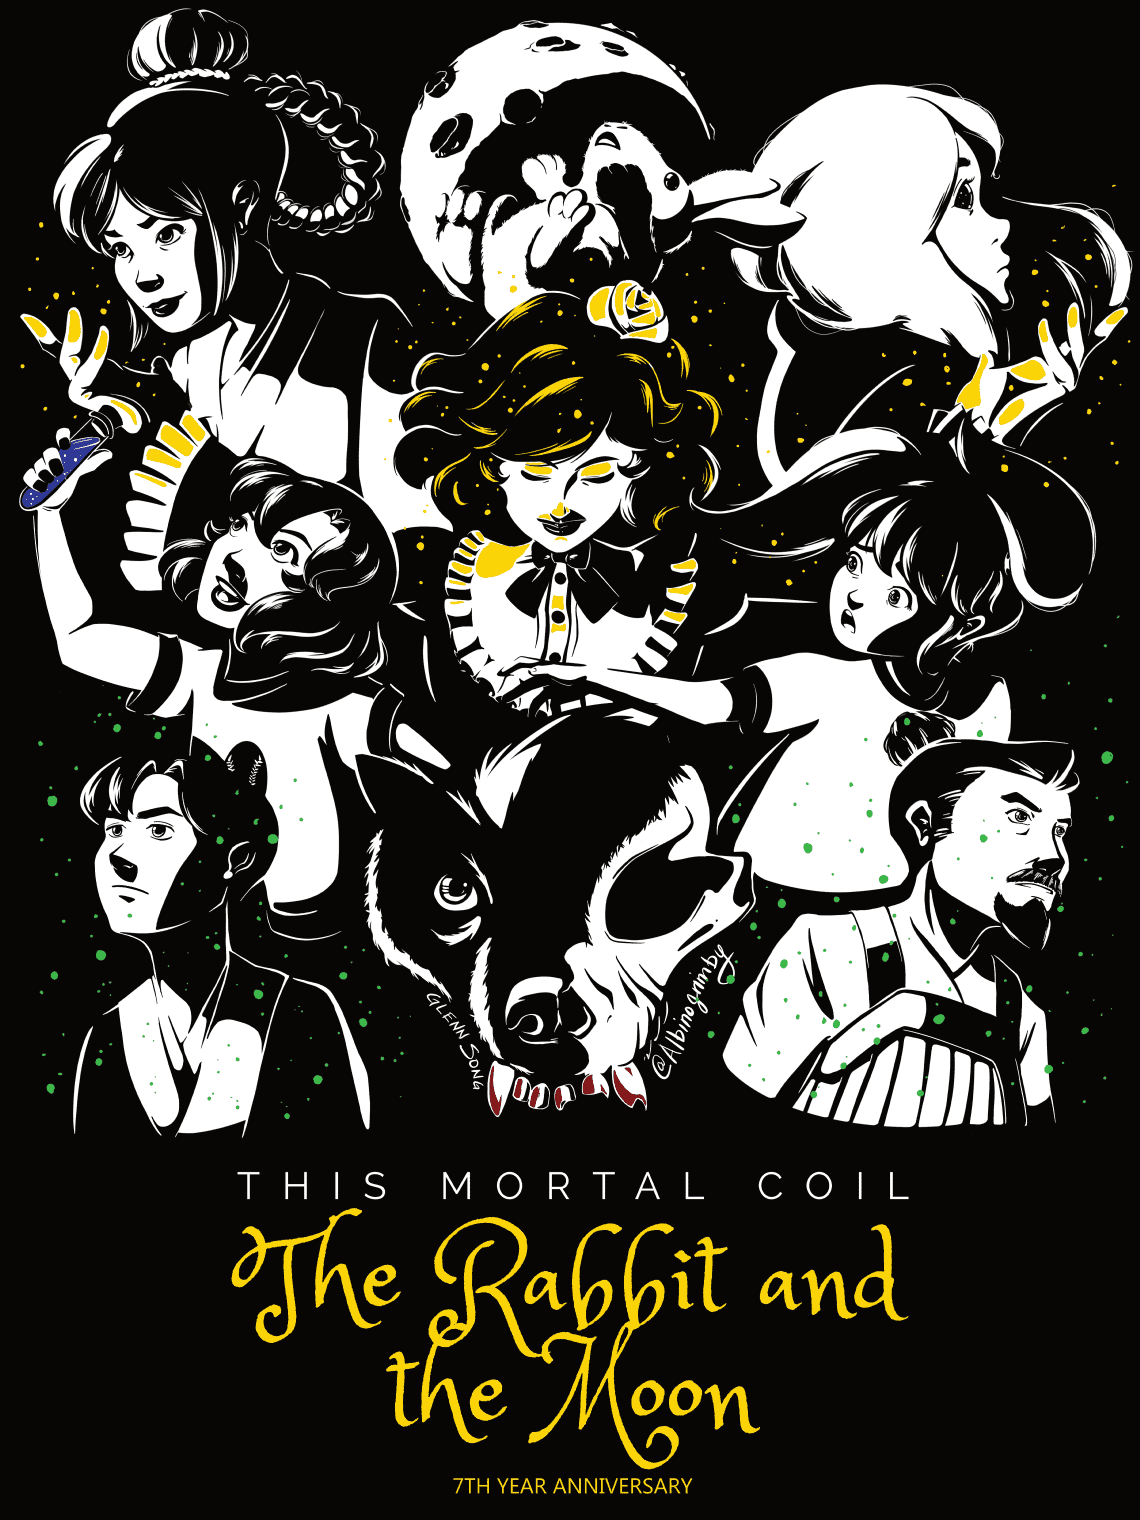 The Rabbit and the Moon's 7th Anniversary poster